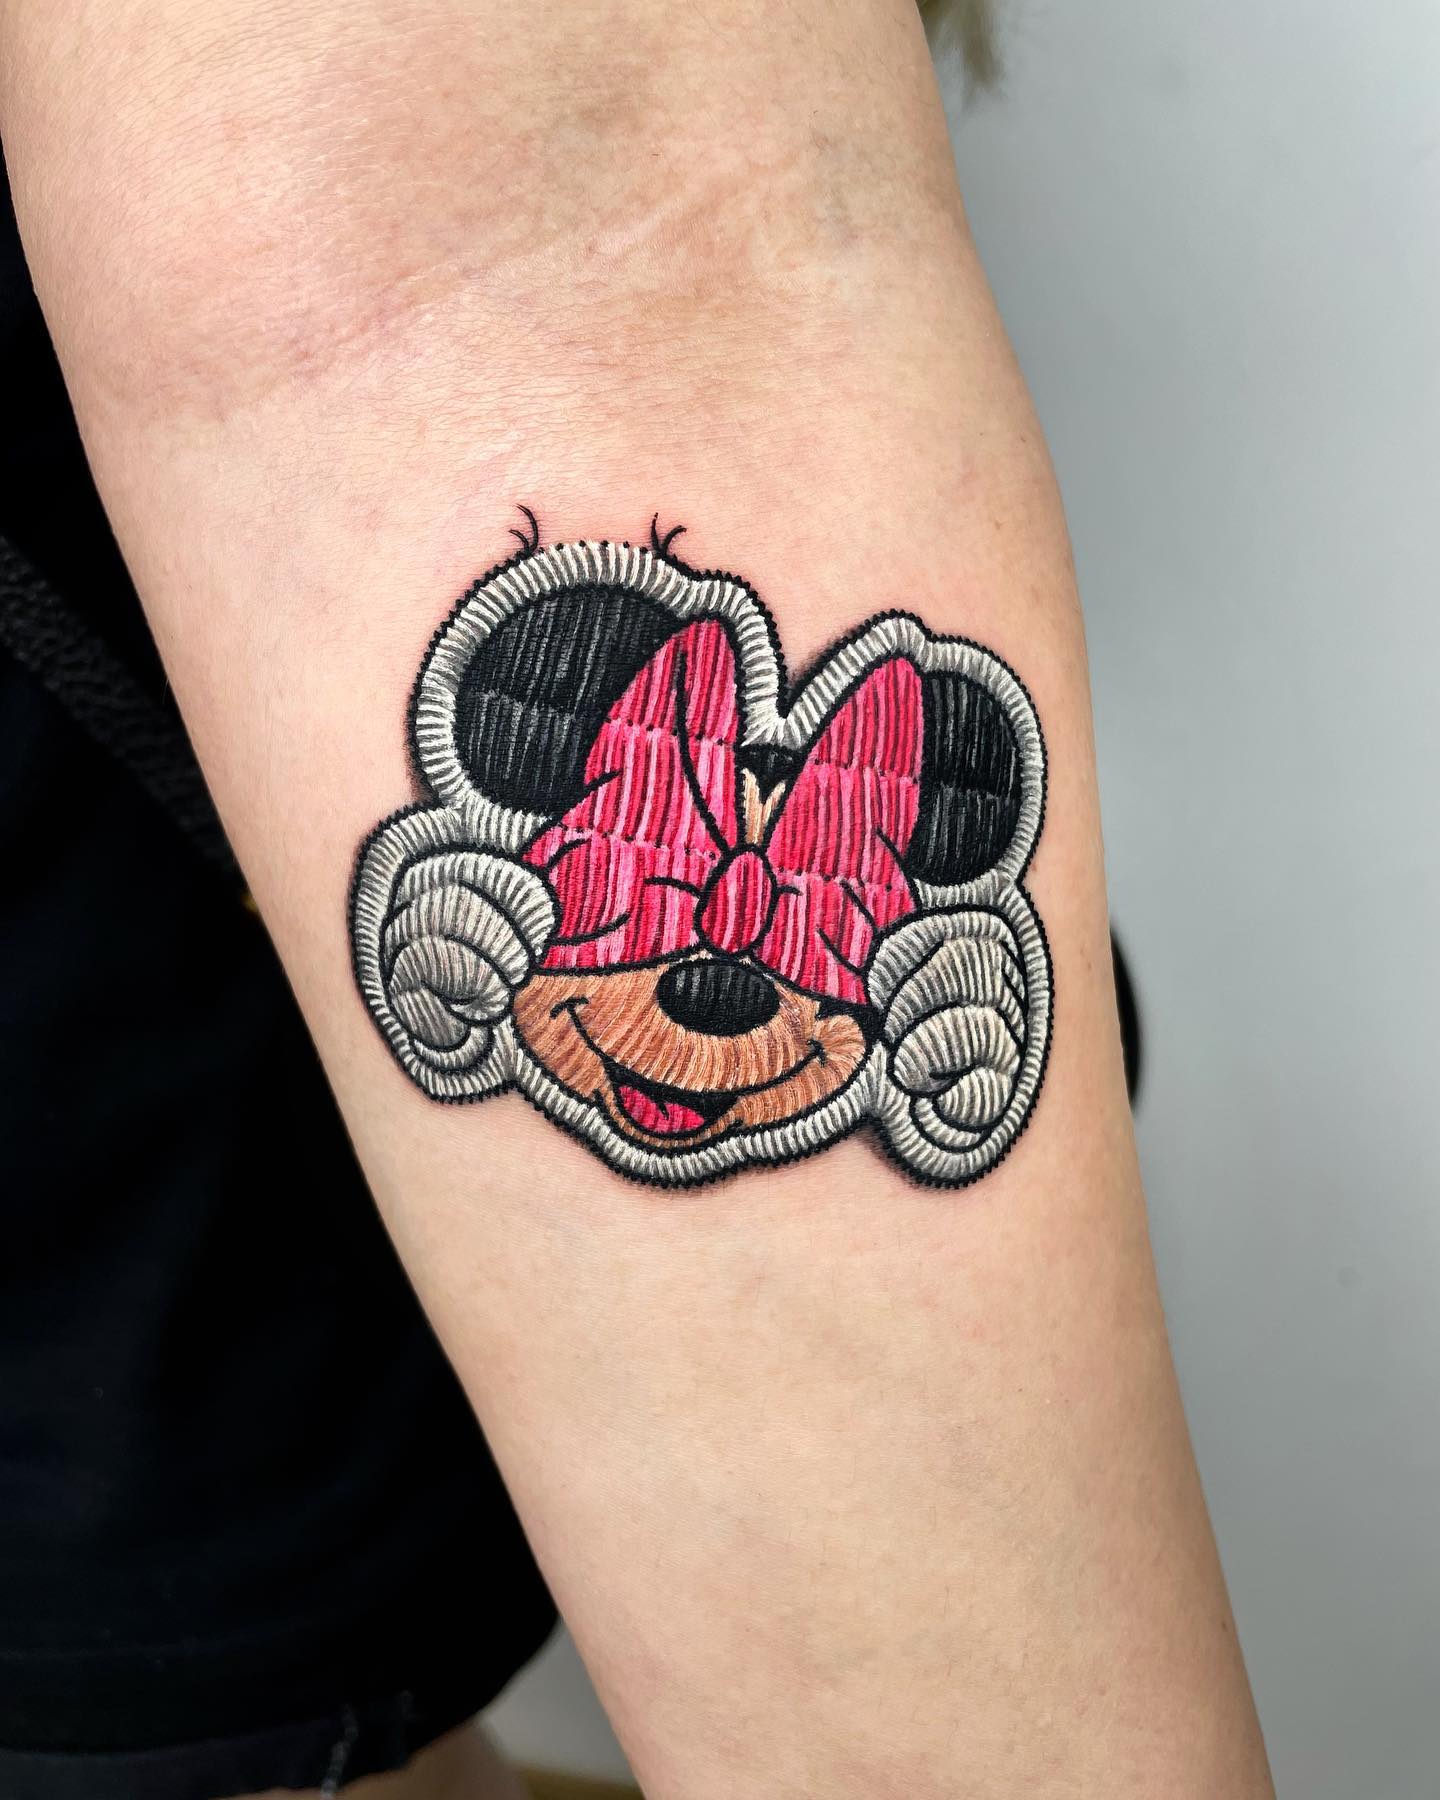 Minnie Mouse embroidery tattoo